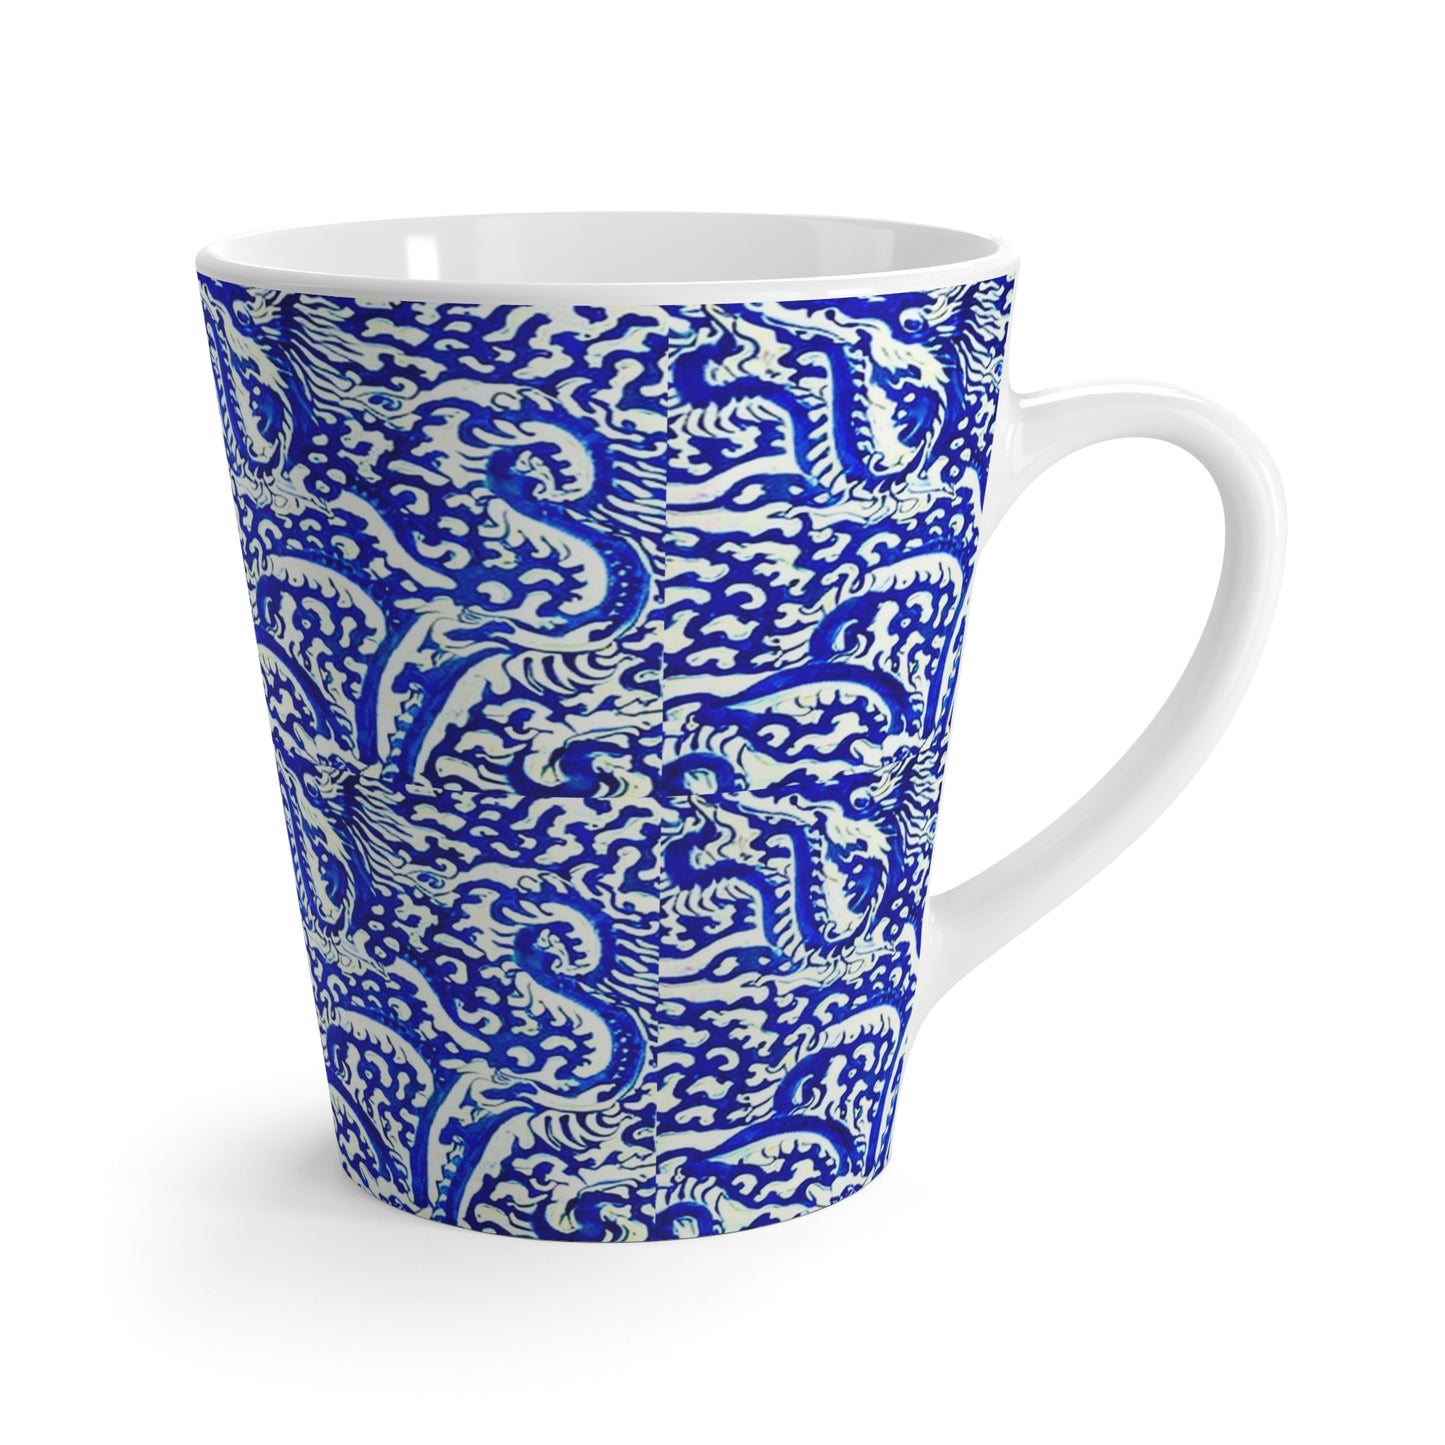 Sea of Chinese Dragons Ming Dynasty Blue and White Porcelain Pattern Chia Tea Cappuccino Hot Beverage Latte Mug